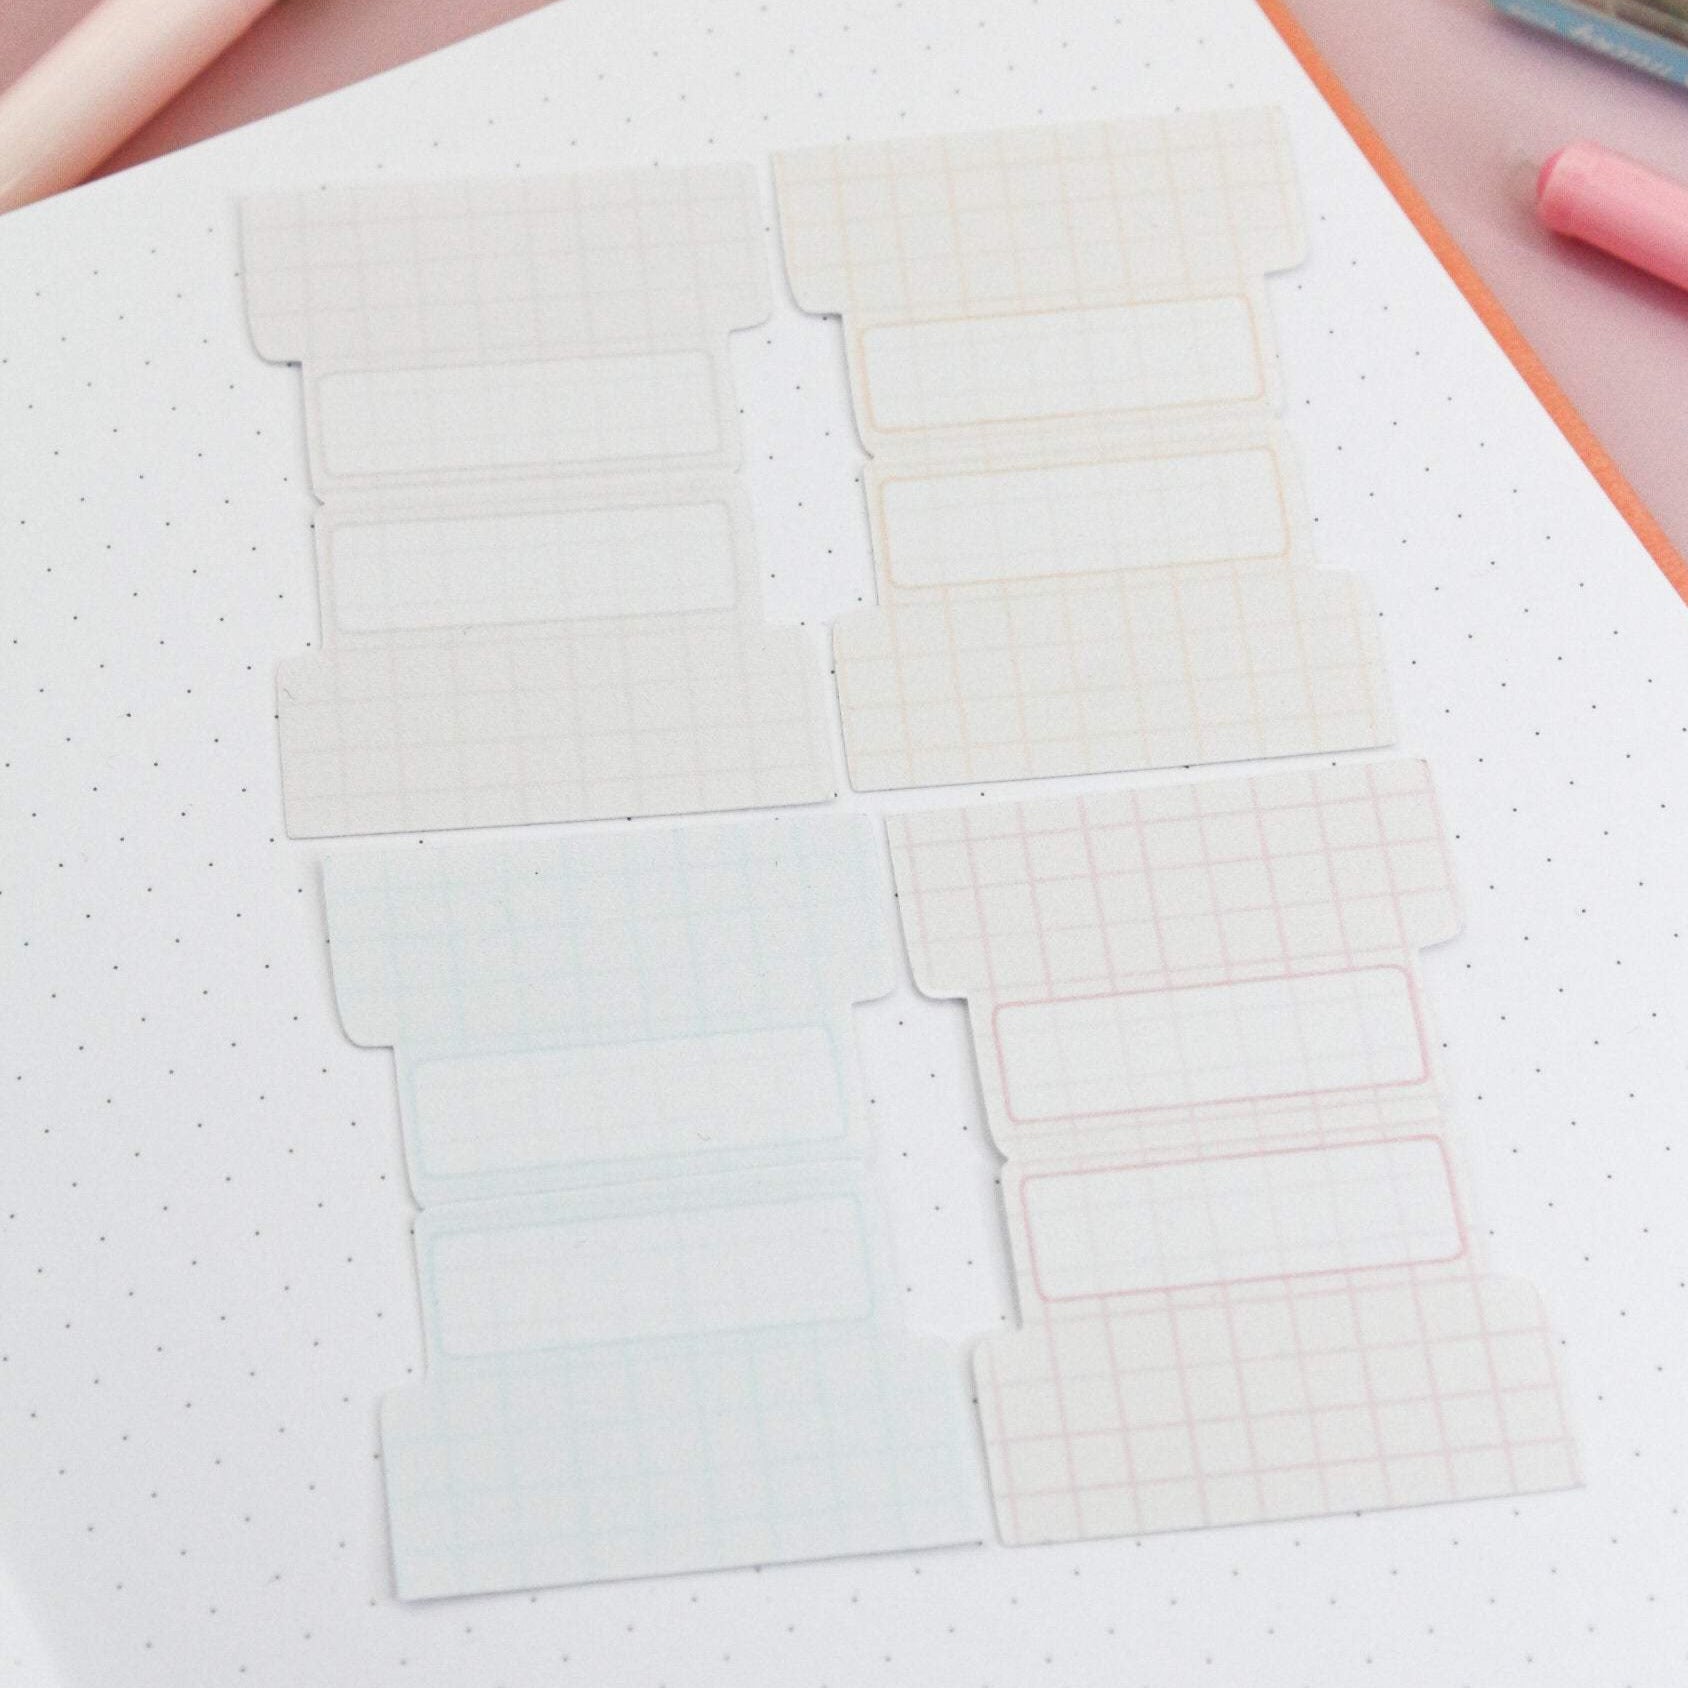 Sticky Notes, Cute Sticky Tabs, Memo Pad, Office and School Supplies,  Pastel Journal Index Tabs, Sticky Index Tabs, Book Tabs, Planner Tabs 